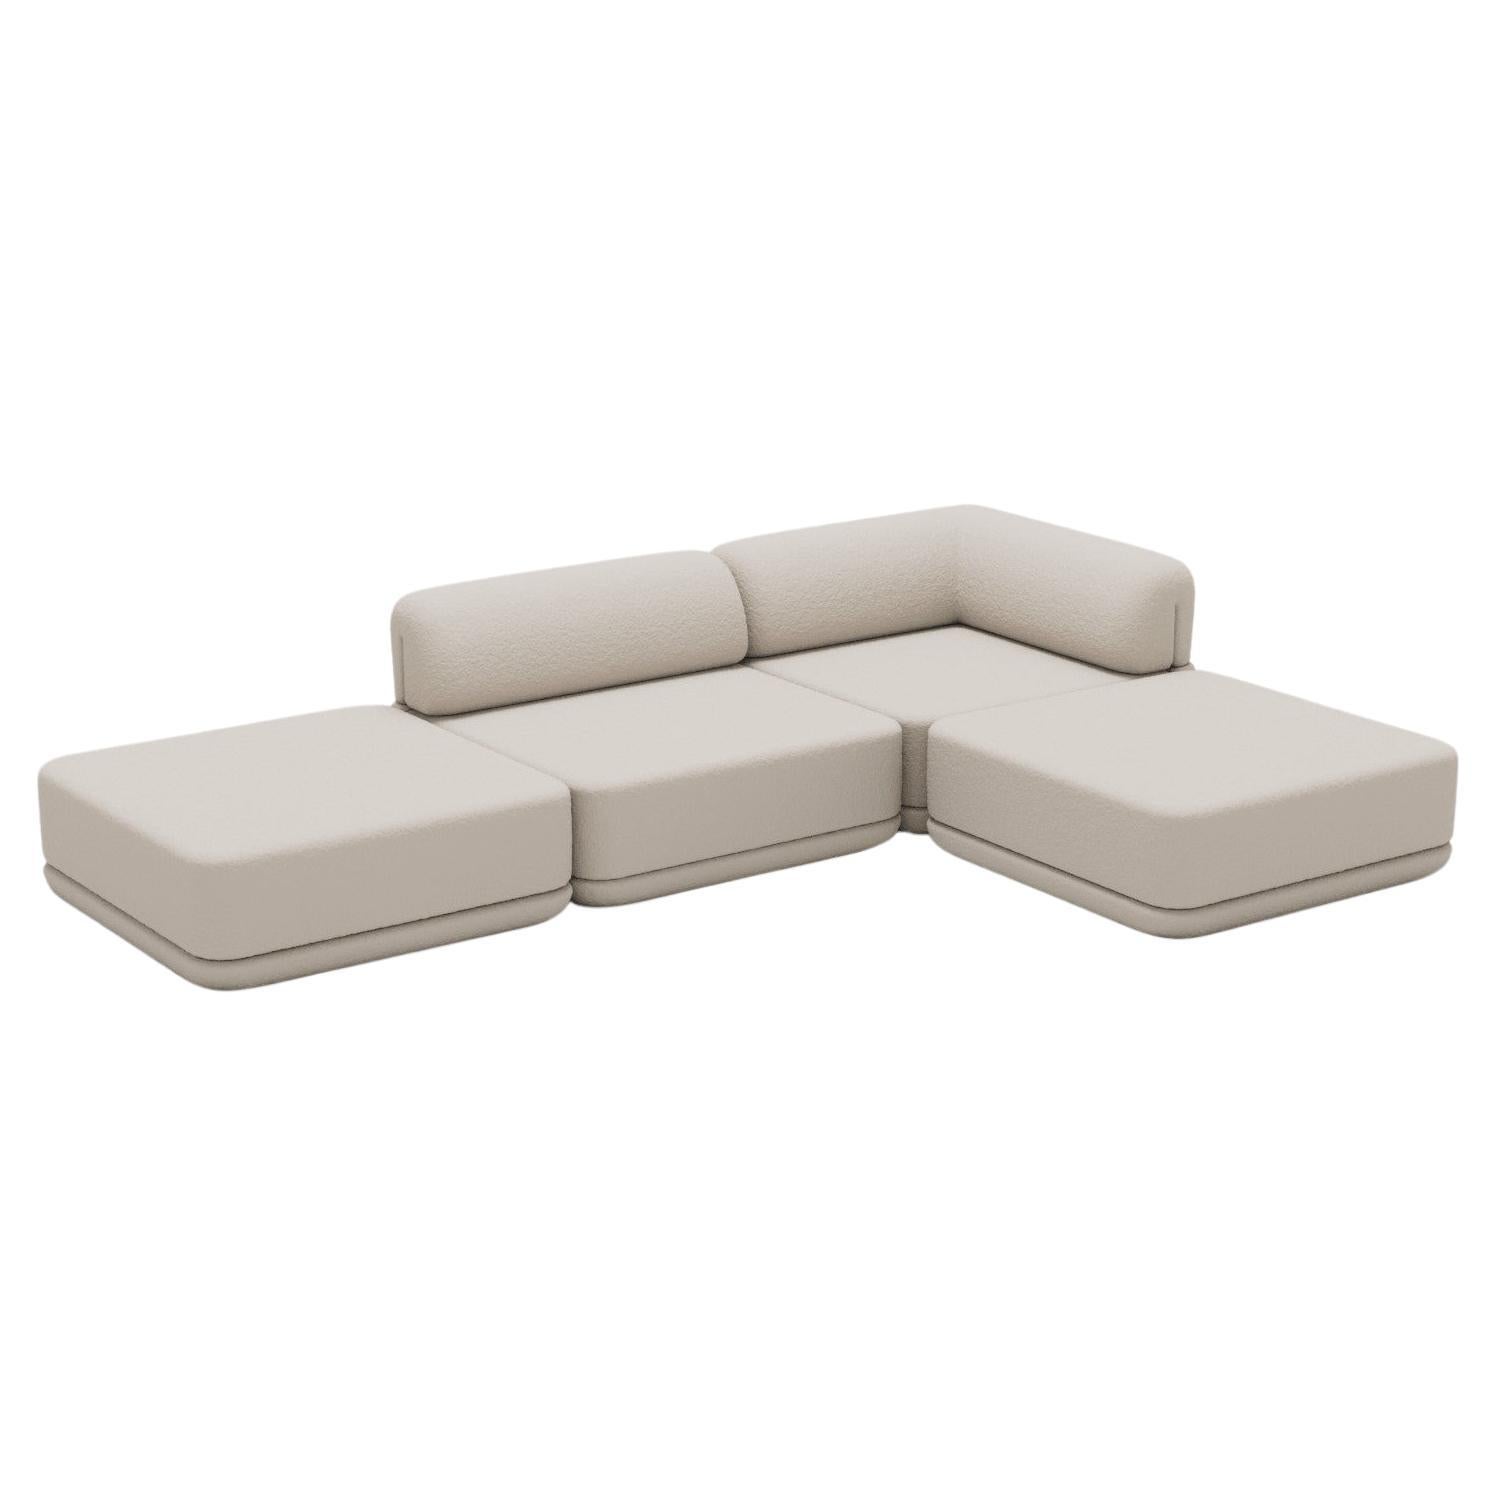 The Cube Sofa - Low Mix Ottoman Sectional For Sale